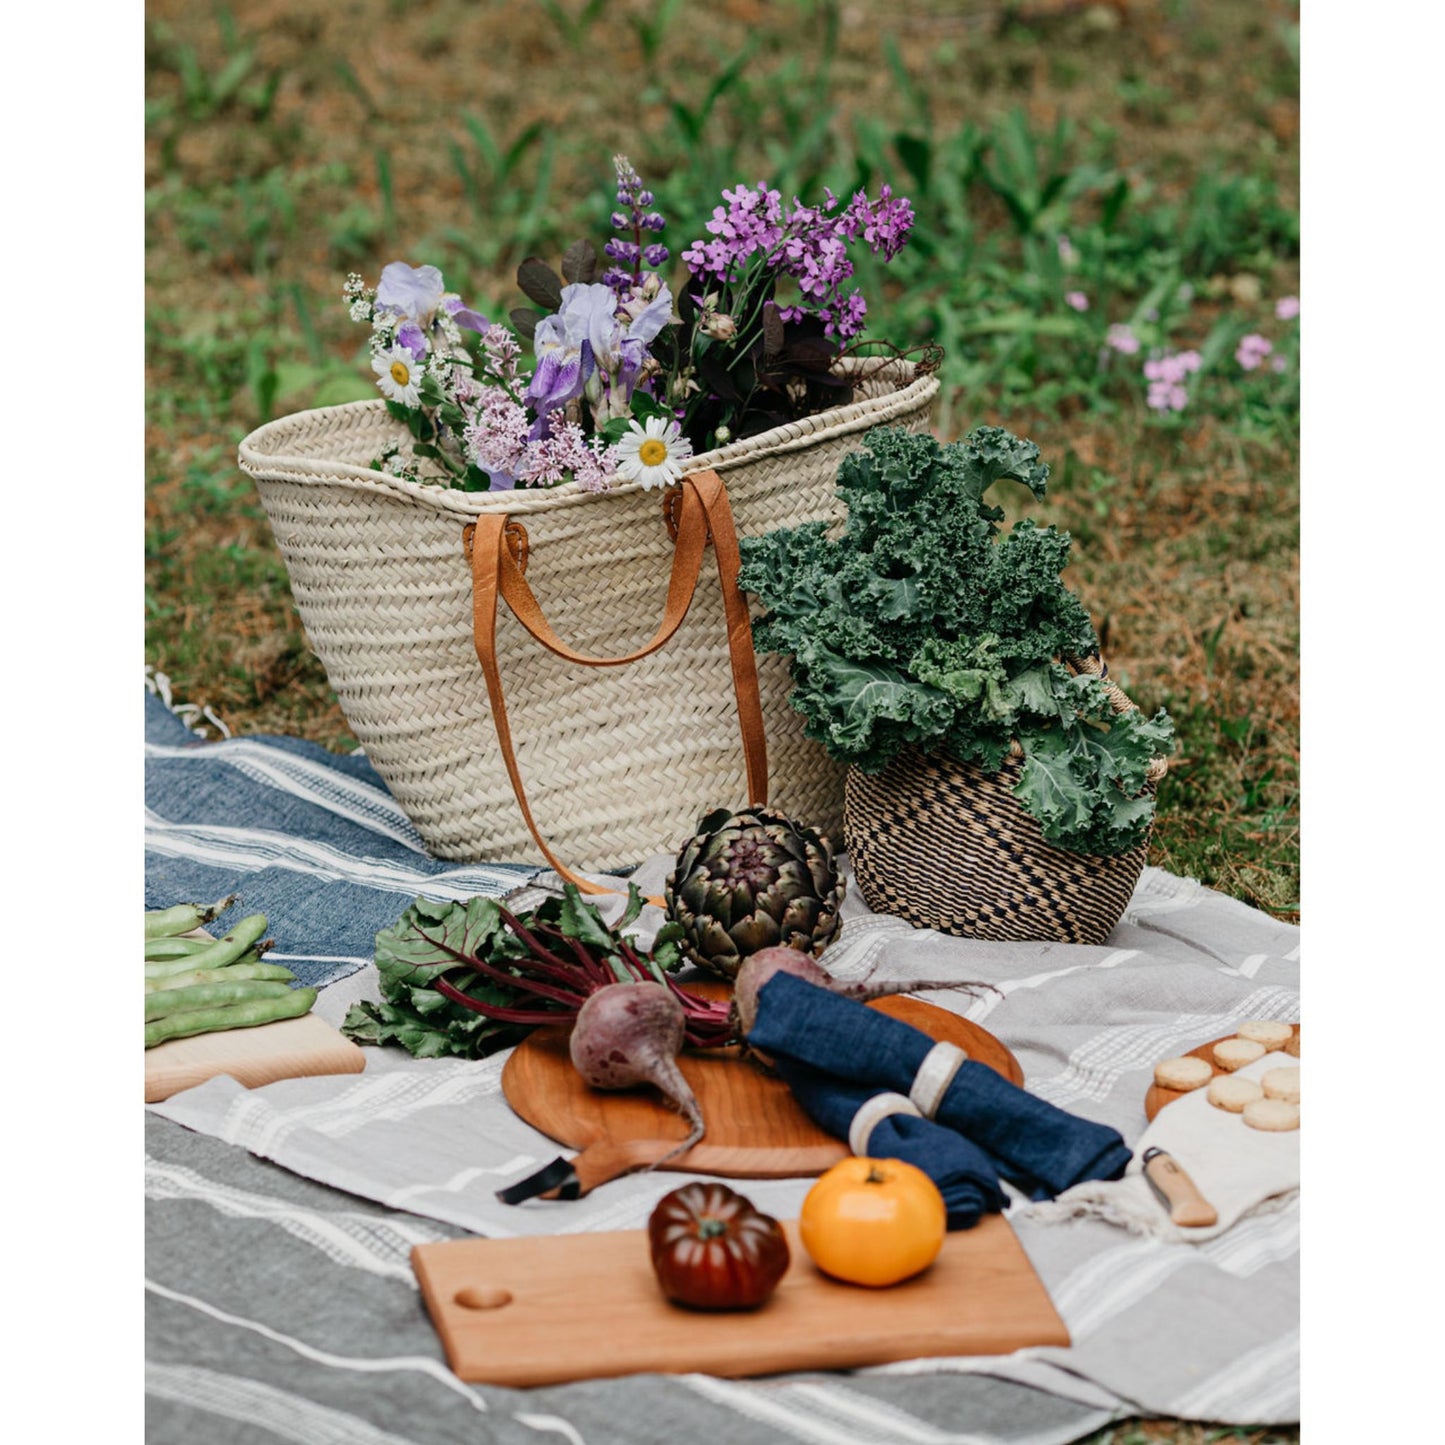 French Market Tote Basket with flowers in it sitting on a picnic blanket with some different foods